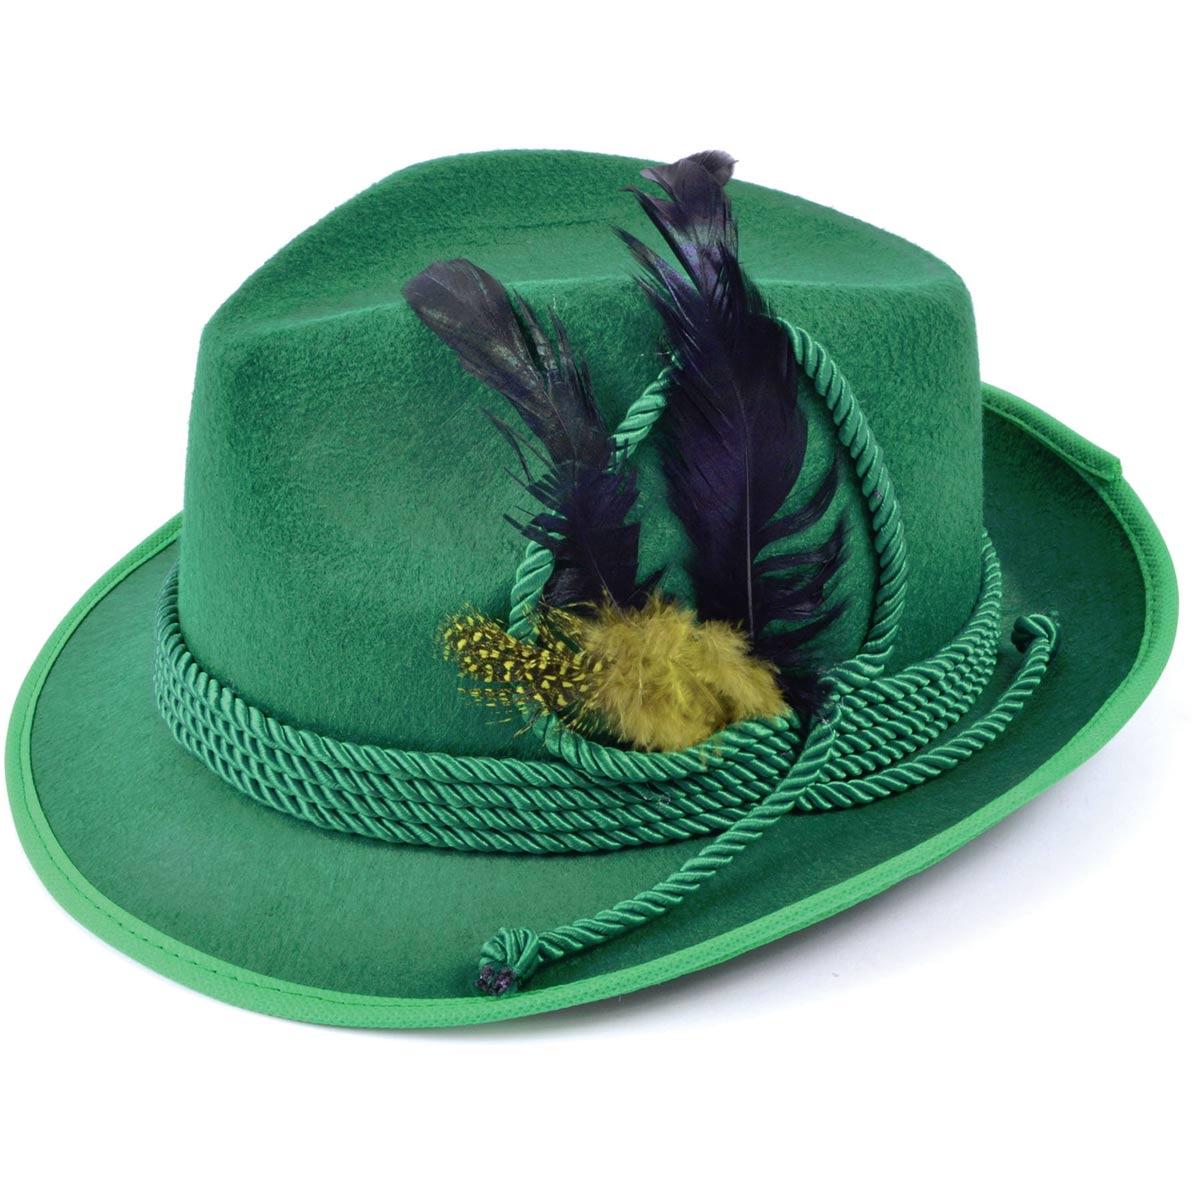 Oktoberfest Trenker Style Felt Hat with Feathers by Bristol Novelties BH516 available here at Karnival Costumes online party shop